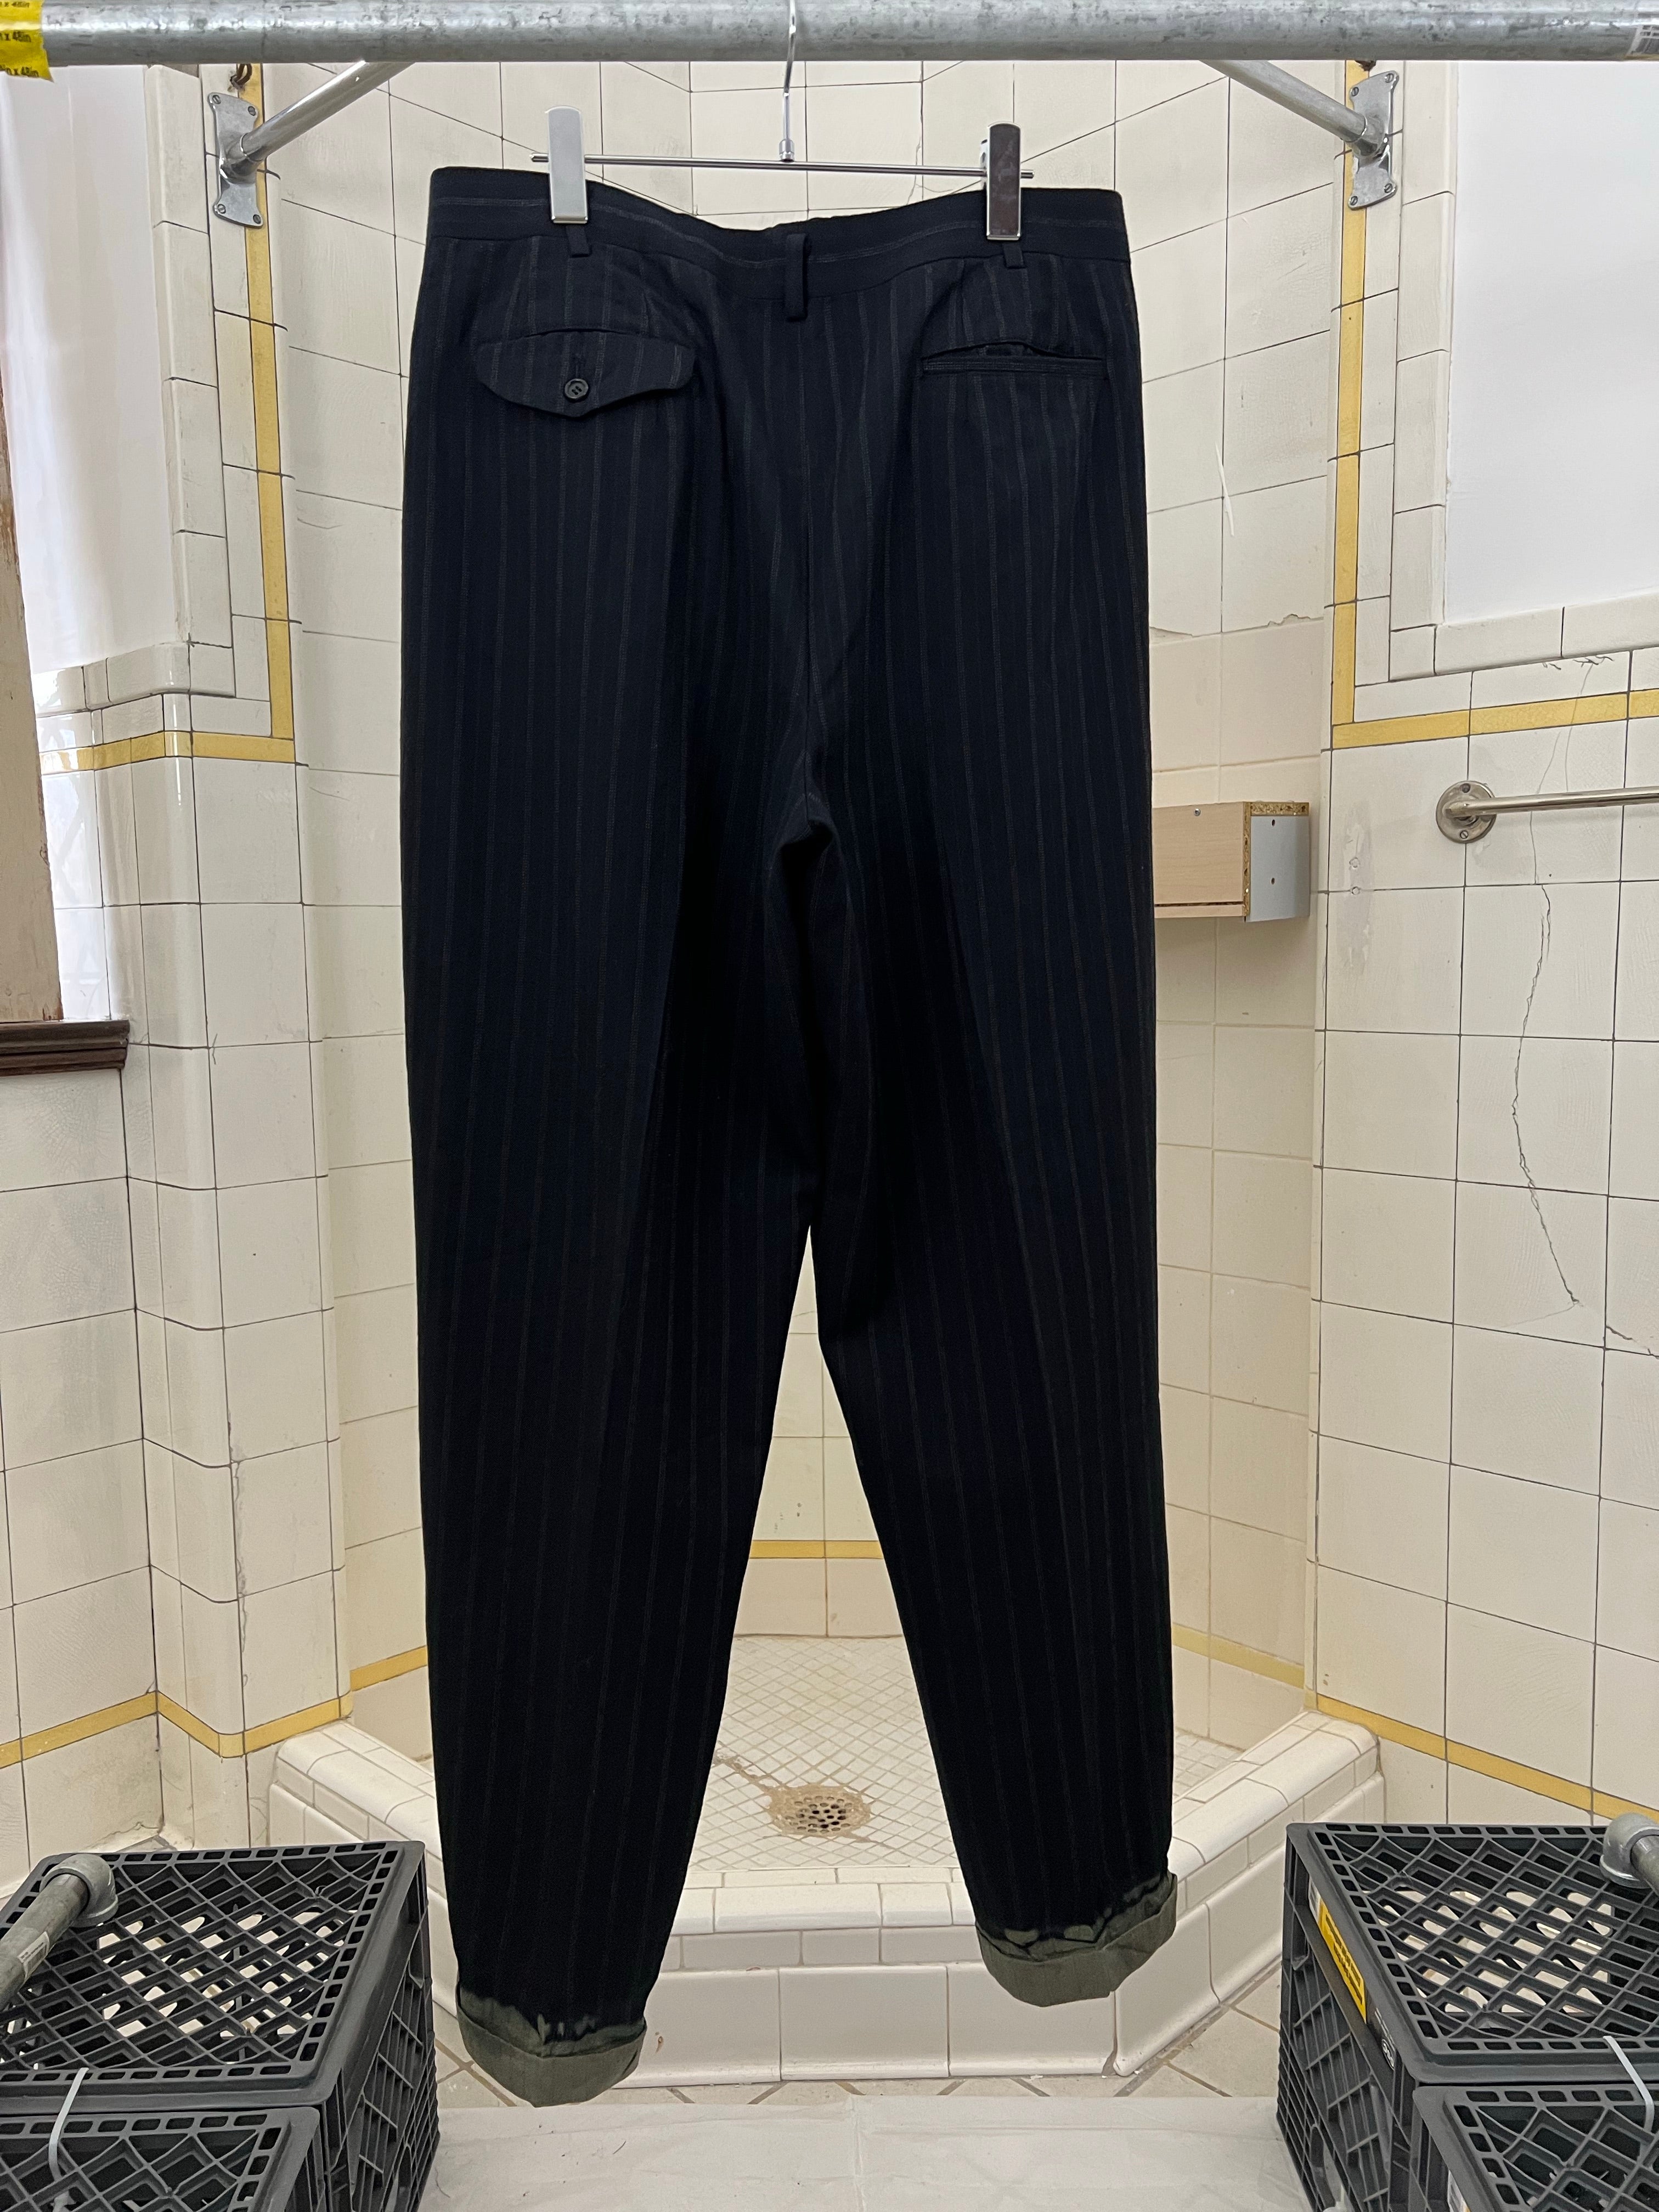 aw1993 Comme des Garcons Homme Plus Pleated Pinstripe Trousers with Bleach Dipped Hems - Size L